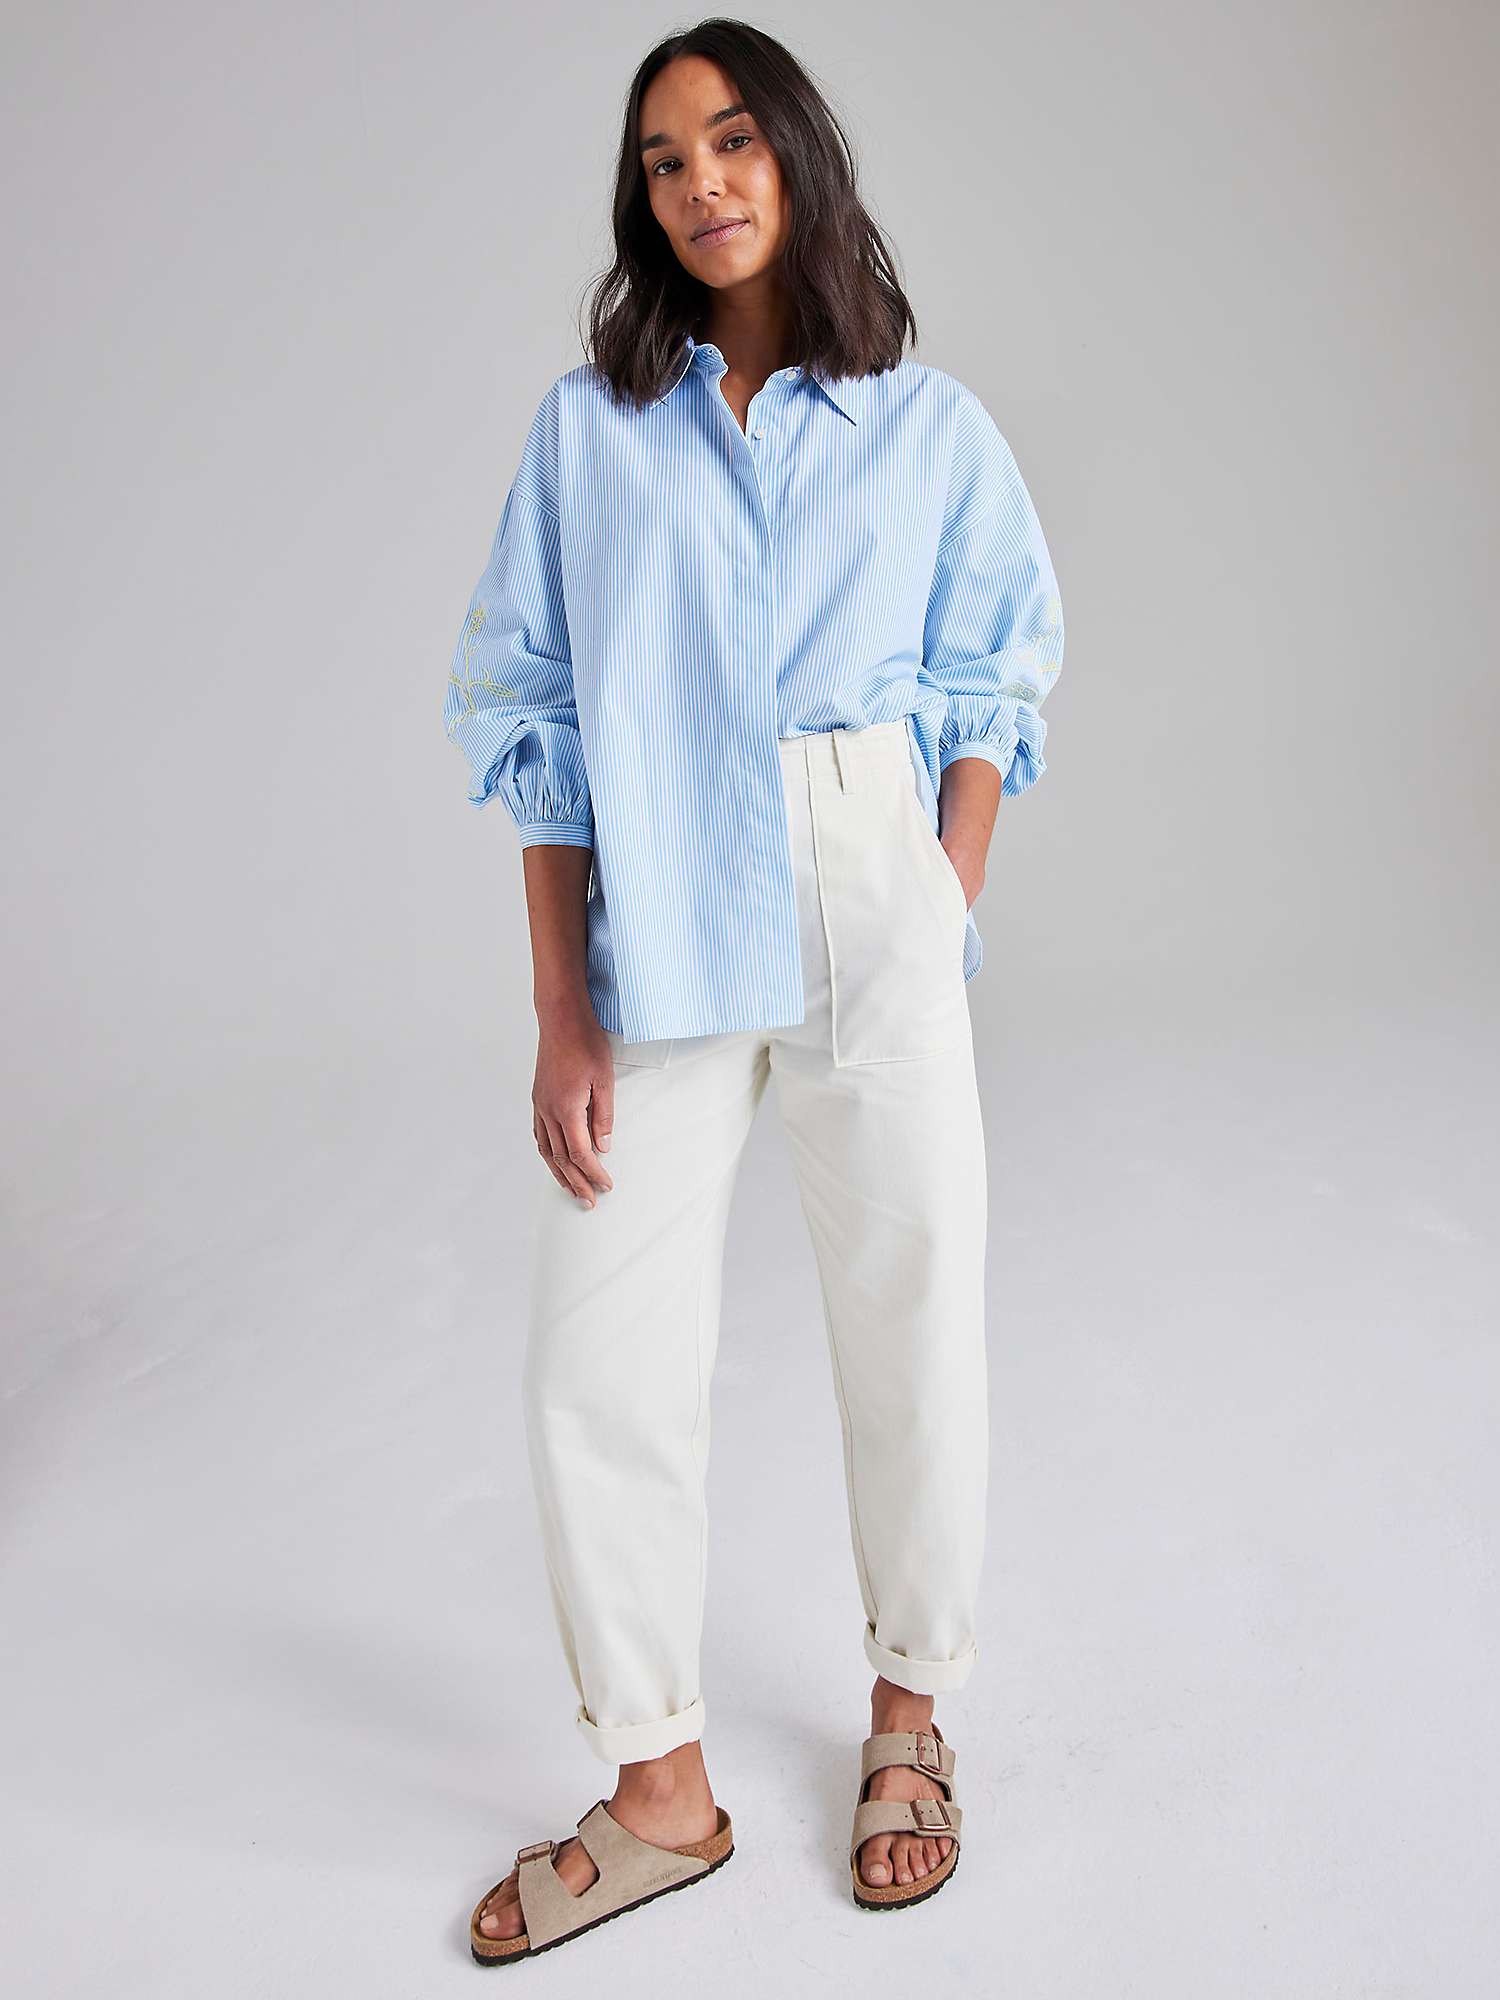 Buy Cape Cove Stripe Botanical Embroidered Blouse, Ice Blue Online at johnlewis.com